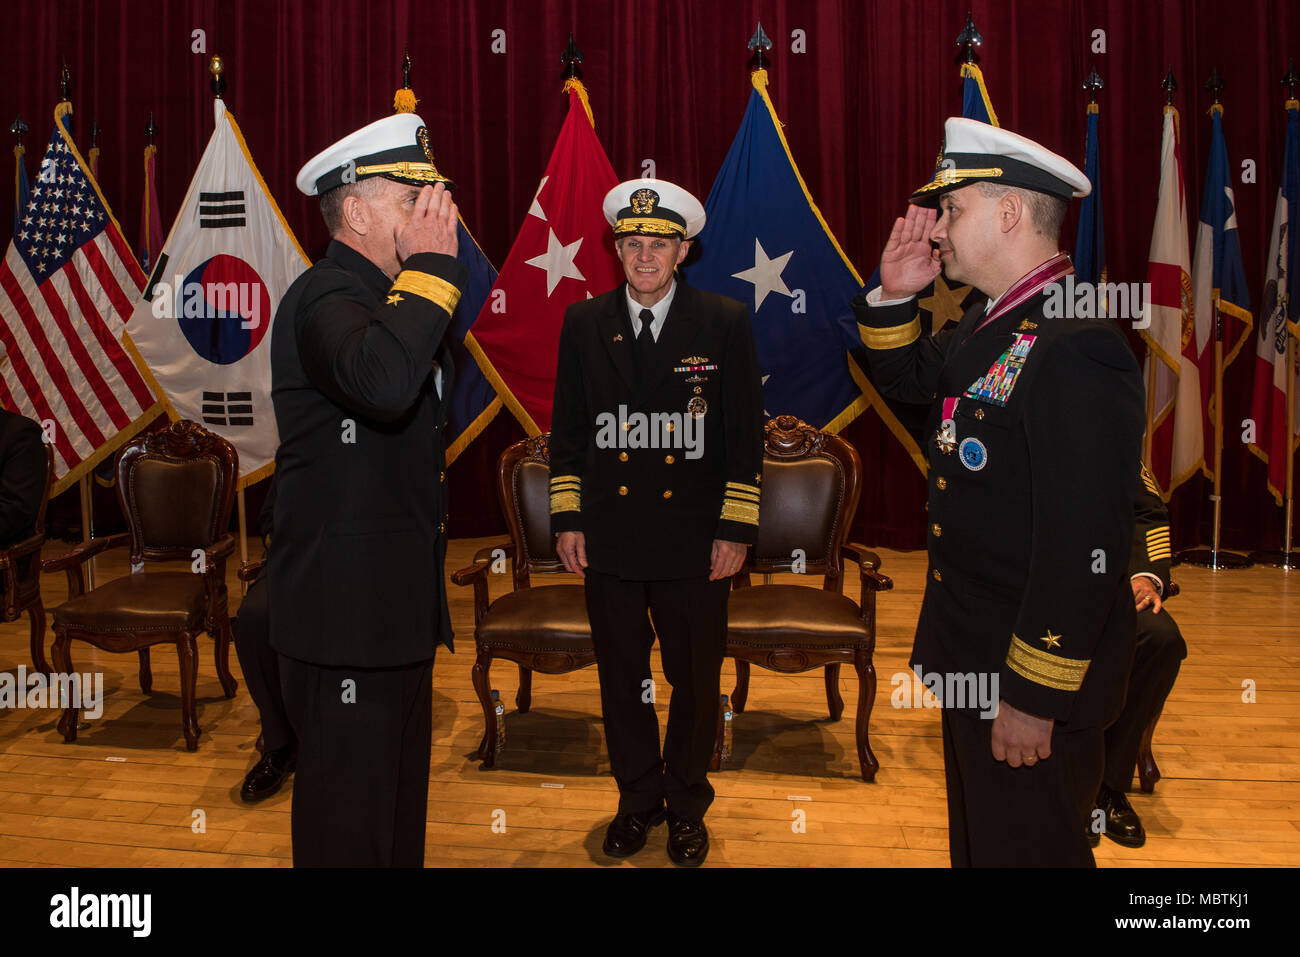 180111-N-TB148-170 Busan, Republic of Korea (Jan 11, 2018) - Rear Adm. Michael E. Boyle renders a salute to Rear Adm. Brad Cooper in front of Vice Adm. Phil J. Sawyer, commander, U.S. Seventh Fleet, assuming command of U.S. Naval Forces Korea (CNFK). During the ceremony Rear Adm. Michael E. Boyle relieved Rear Adm. Brad Cooper, becoming CNFK’s 36th commander. (U.S. Navy photo by Mass Communication Specialist Seaman William Carlisle) Stock Photo